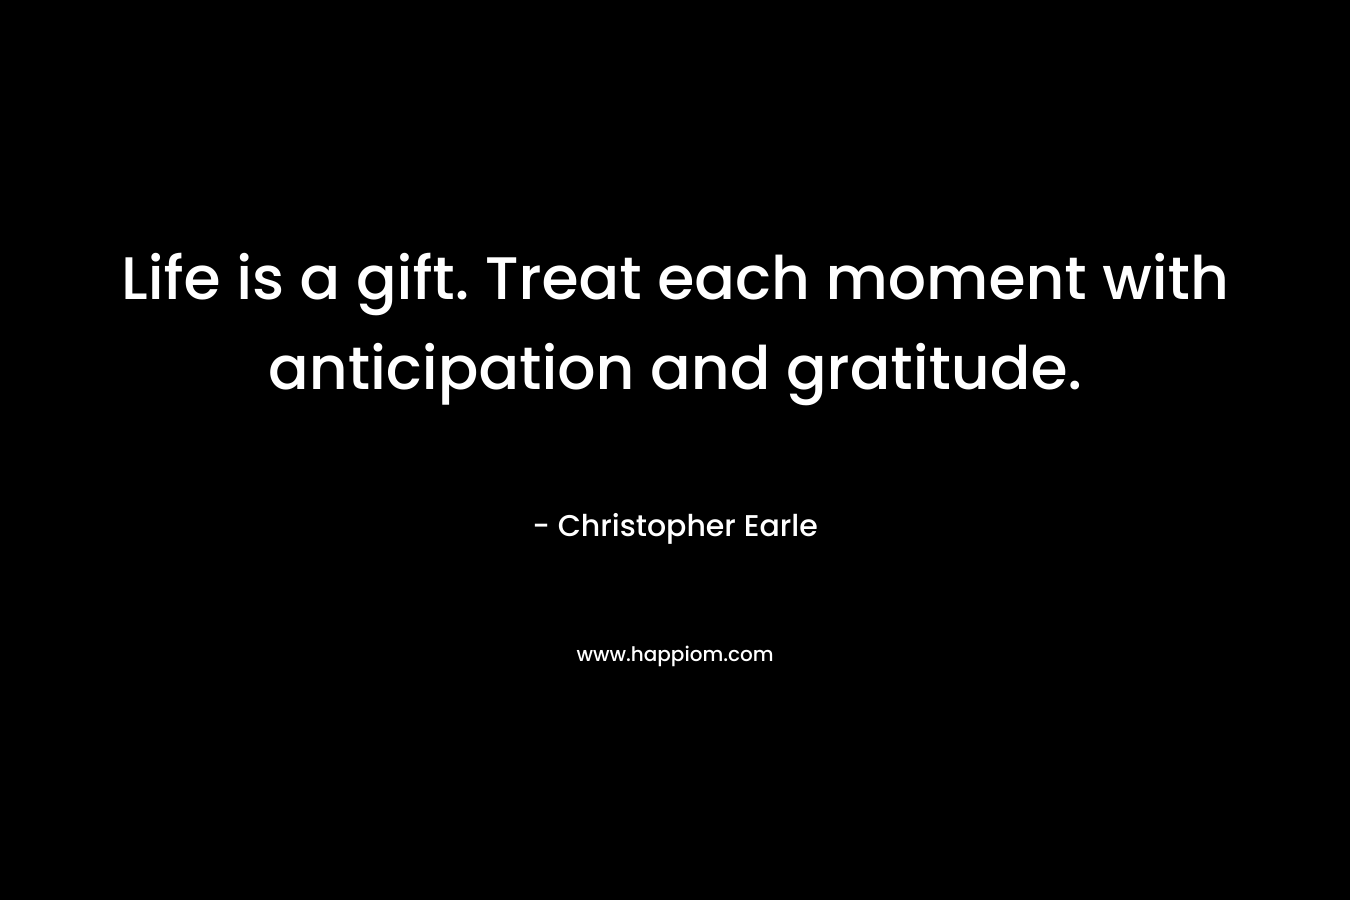 Life is a gift. Treat each moment with anticipation and gratitude. – Christopher Earle